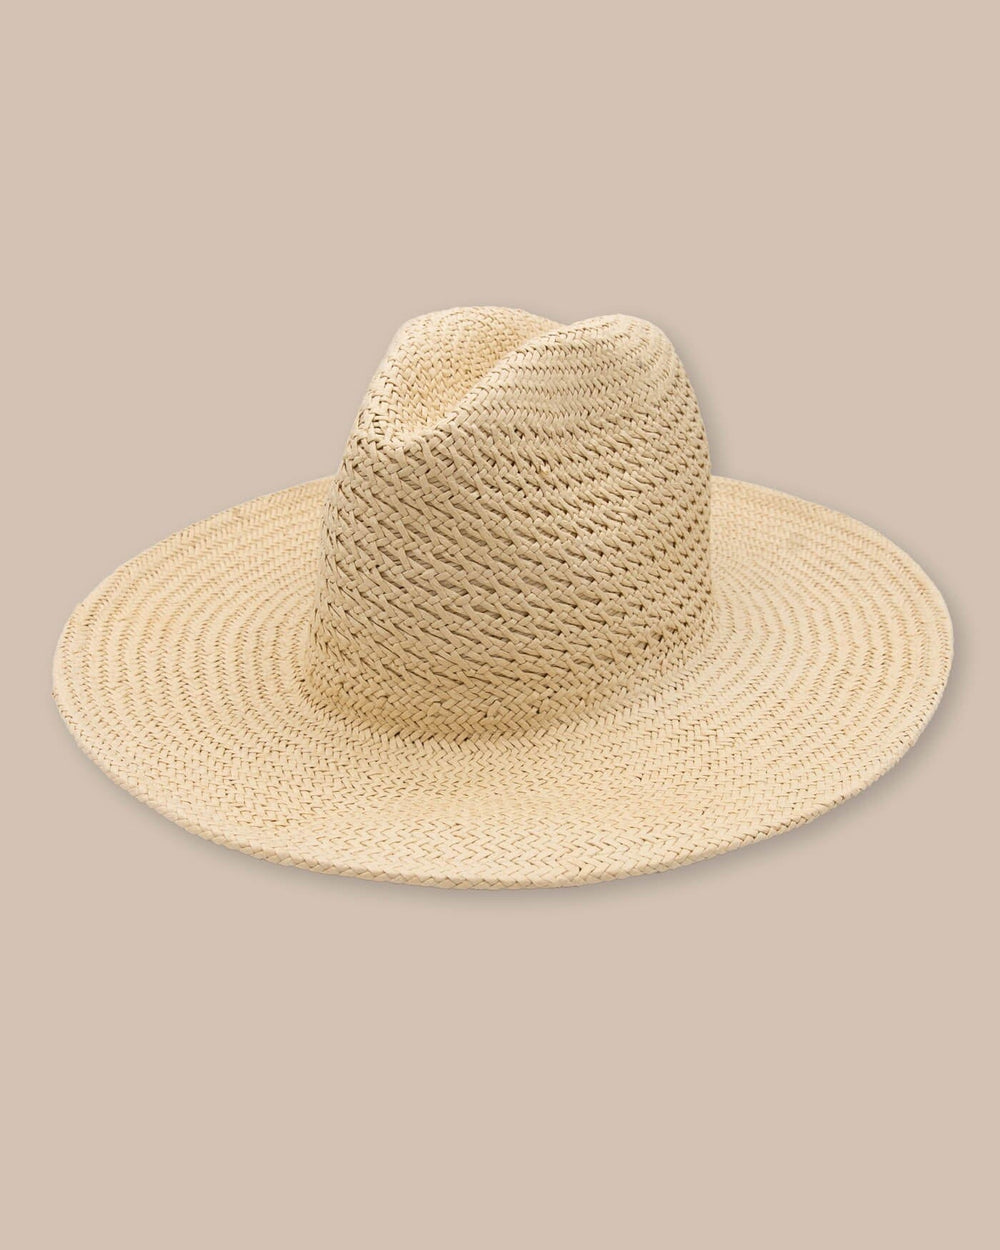 The front view of the Southern Tide Packable Straw Beach Hat by Southern Tide - Natural